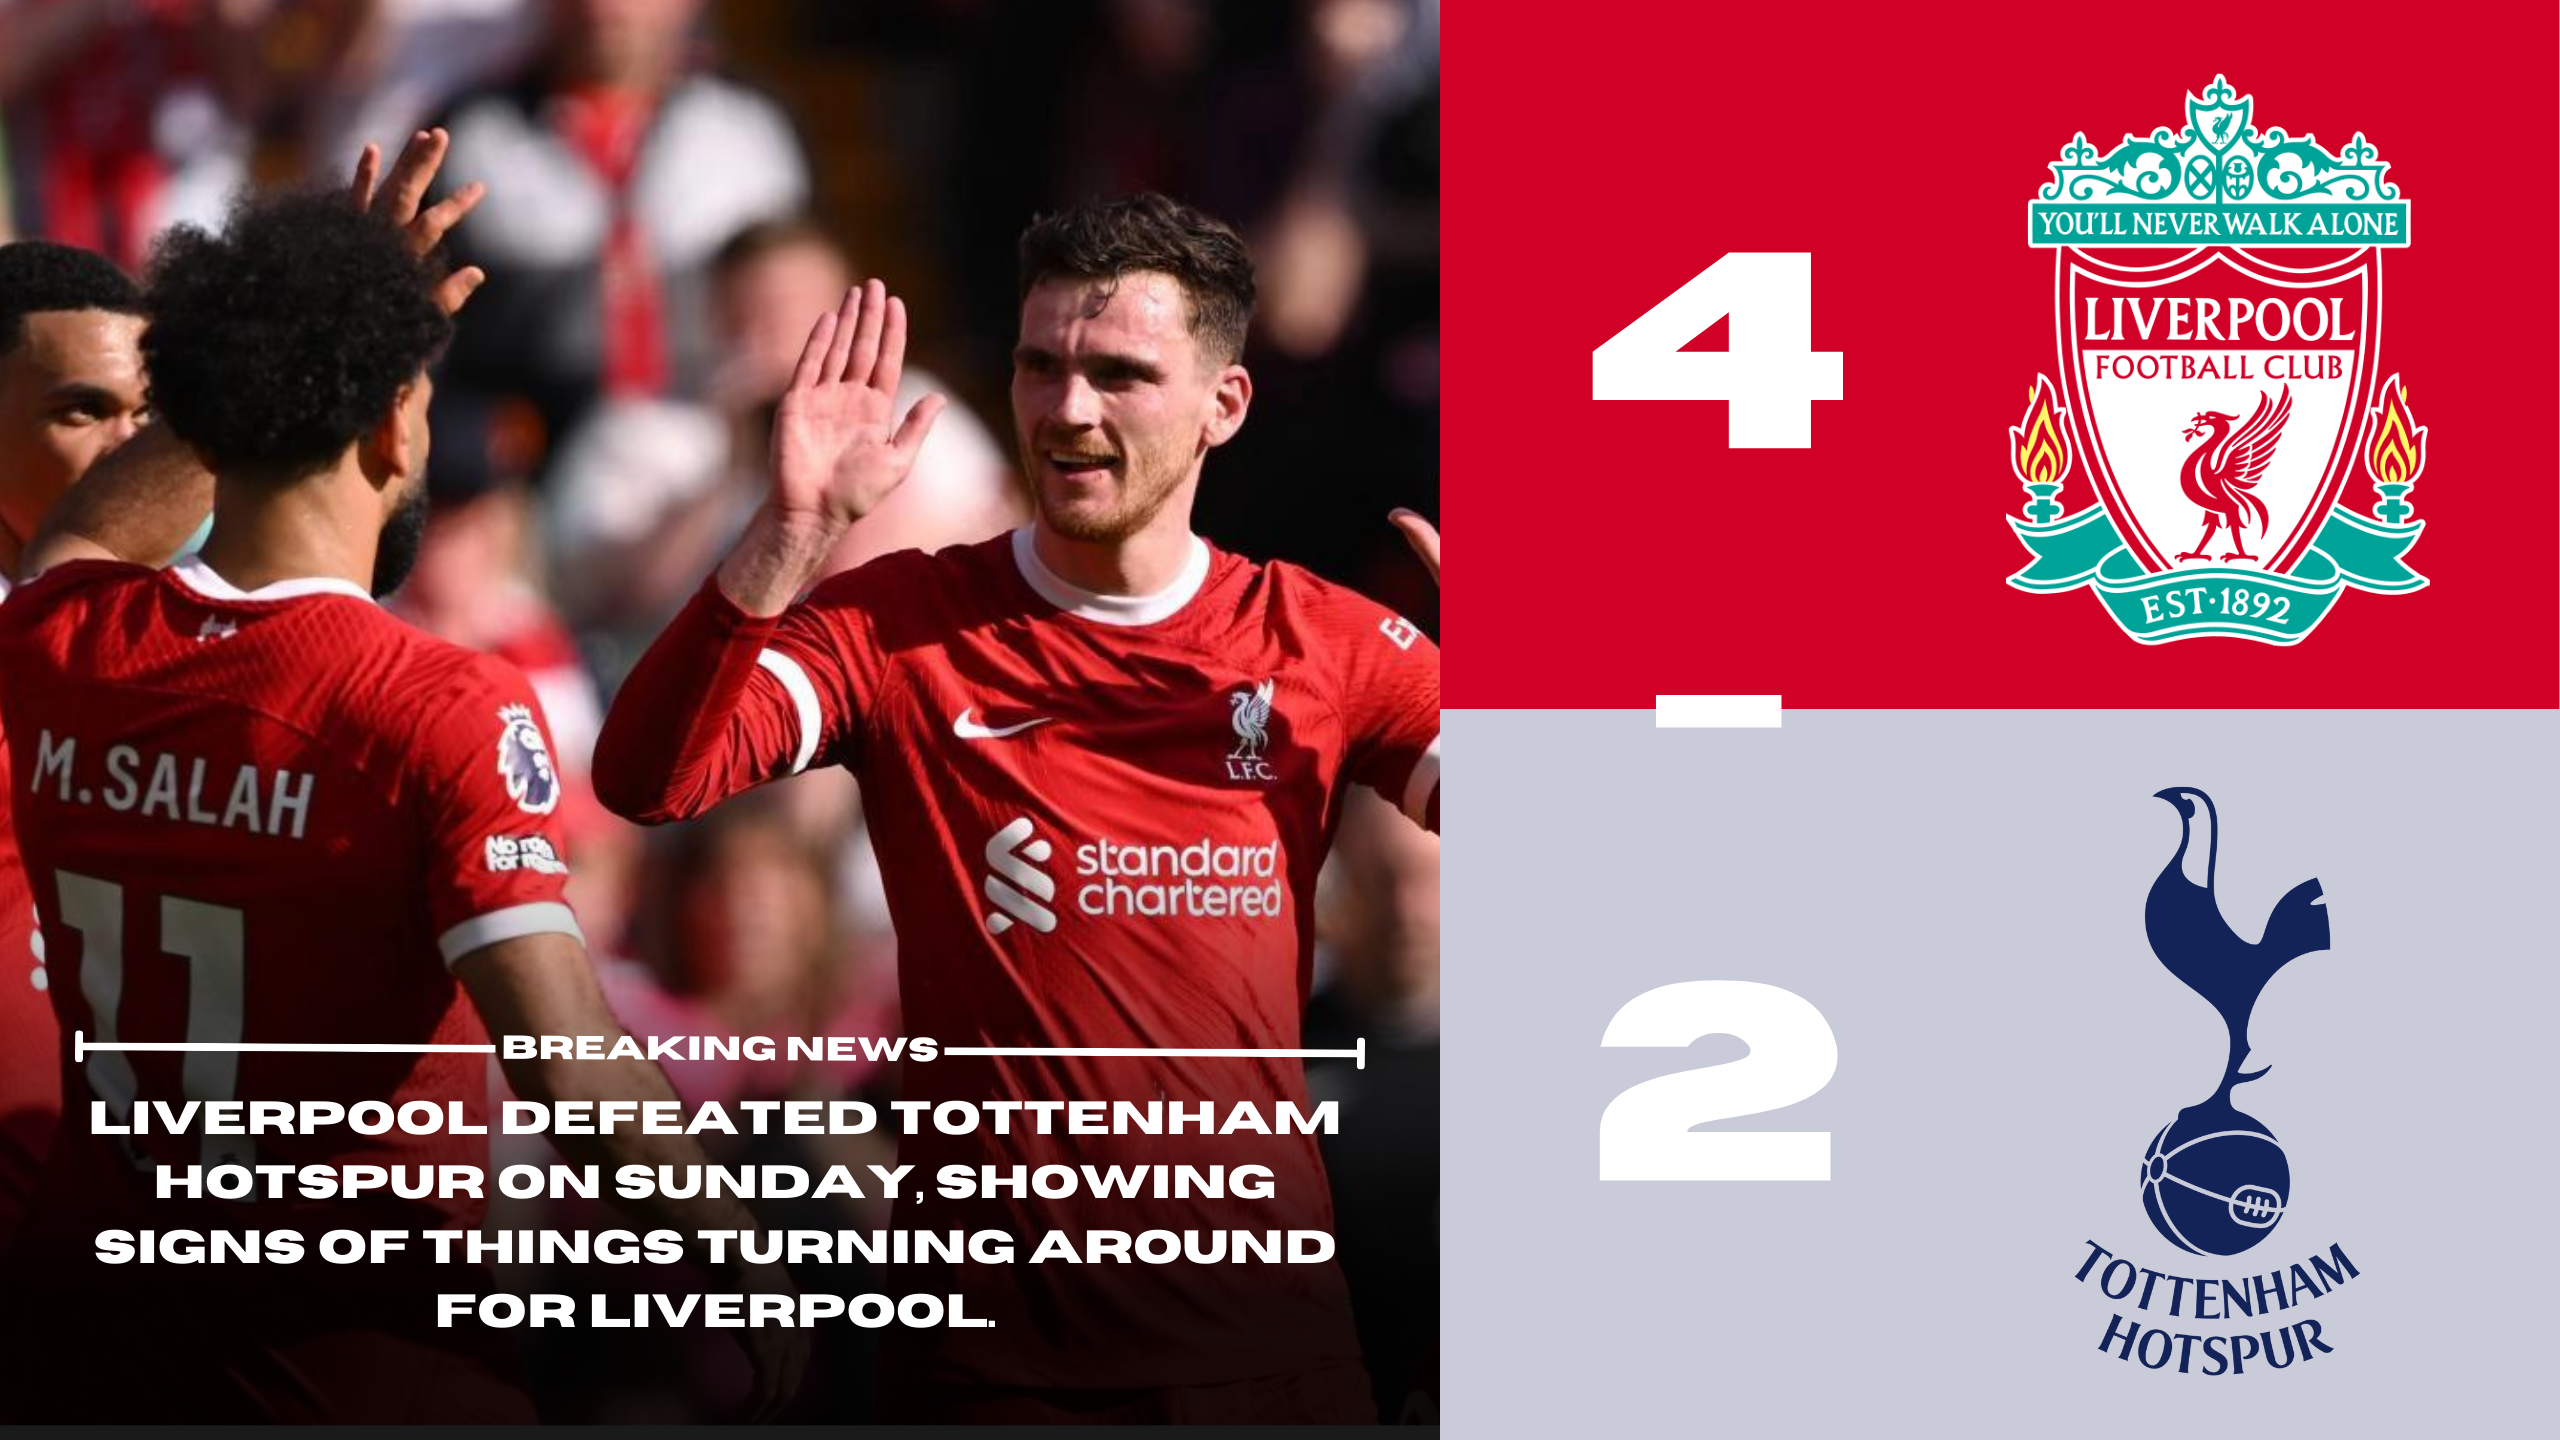 Liverpool 4 - 2 Tottenham. Liverpool dominate Tottenham showing signs of things turning around for Liverpool